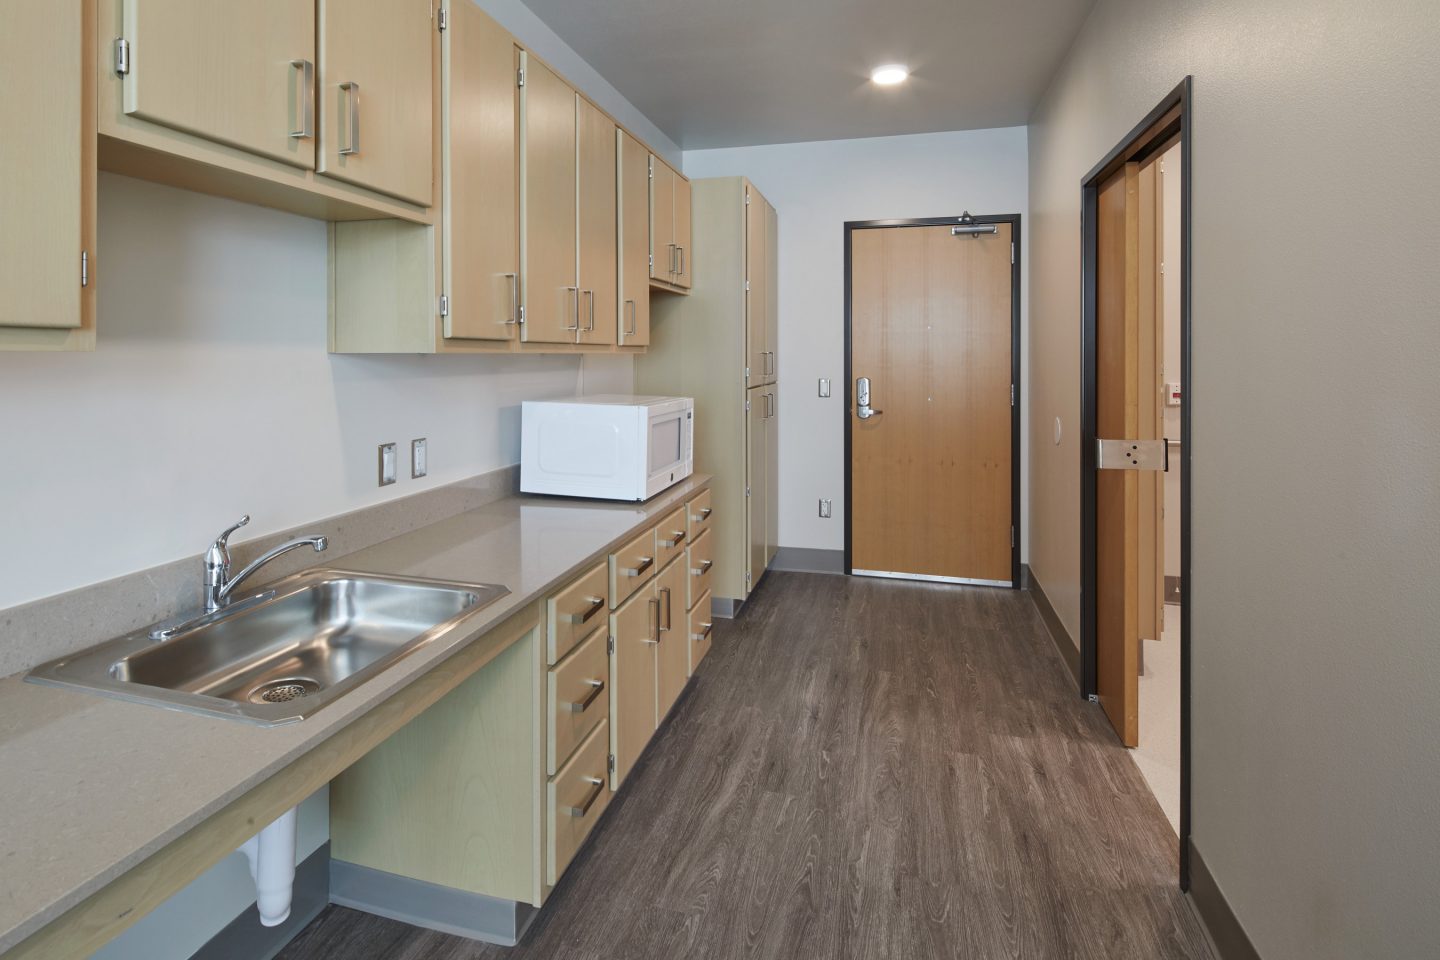 A Wide Entry Hallway Is Flanked By A Kitchenette With Wood Cabinets.